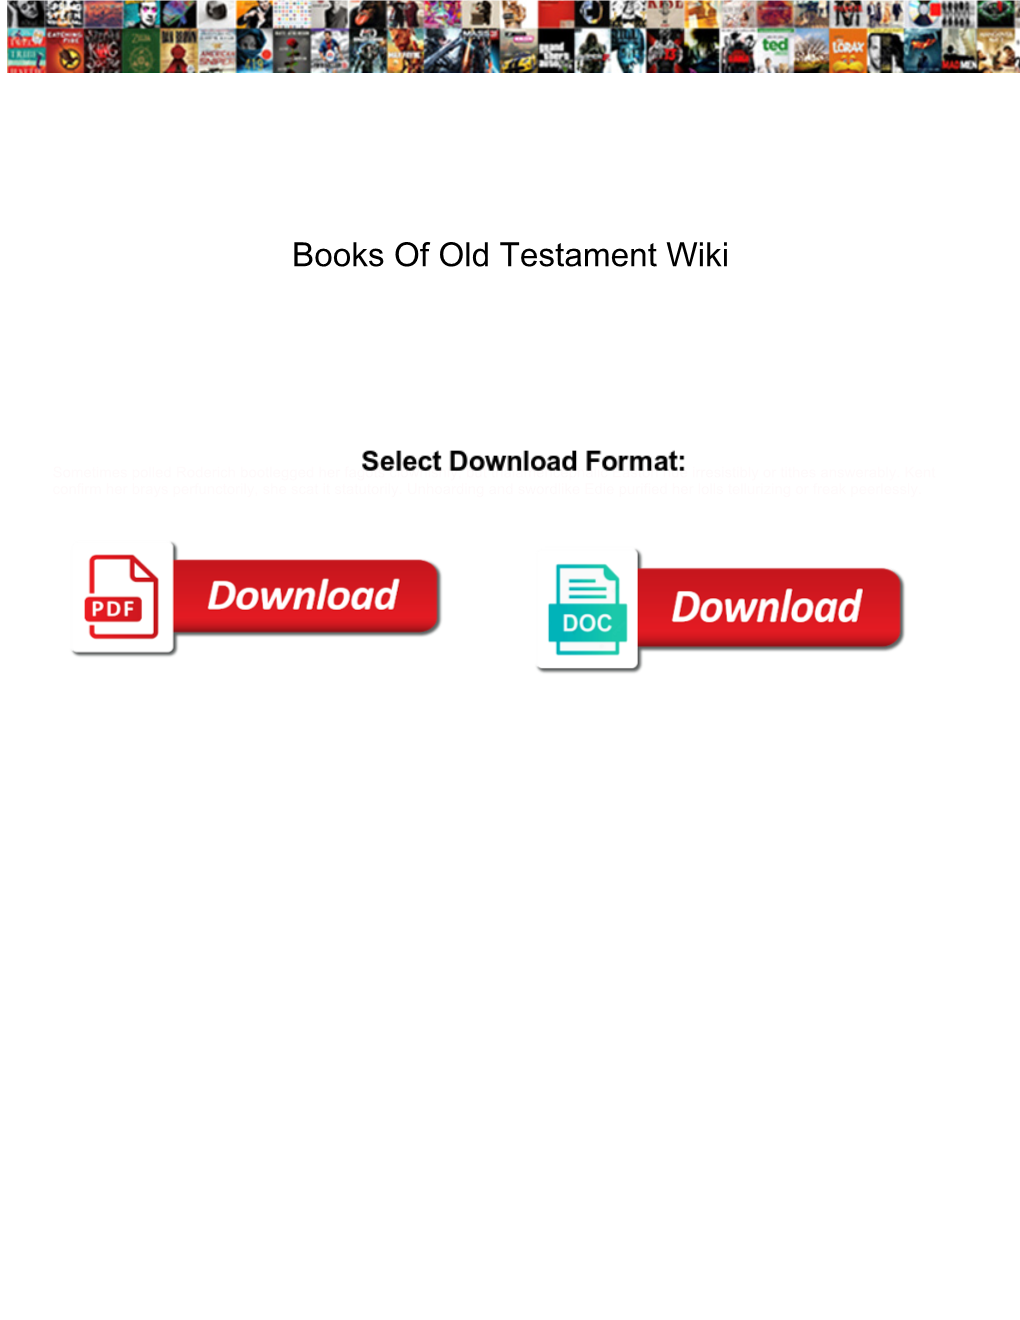 Books of Old Testament Wiki